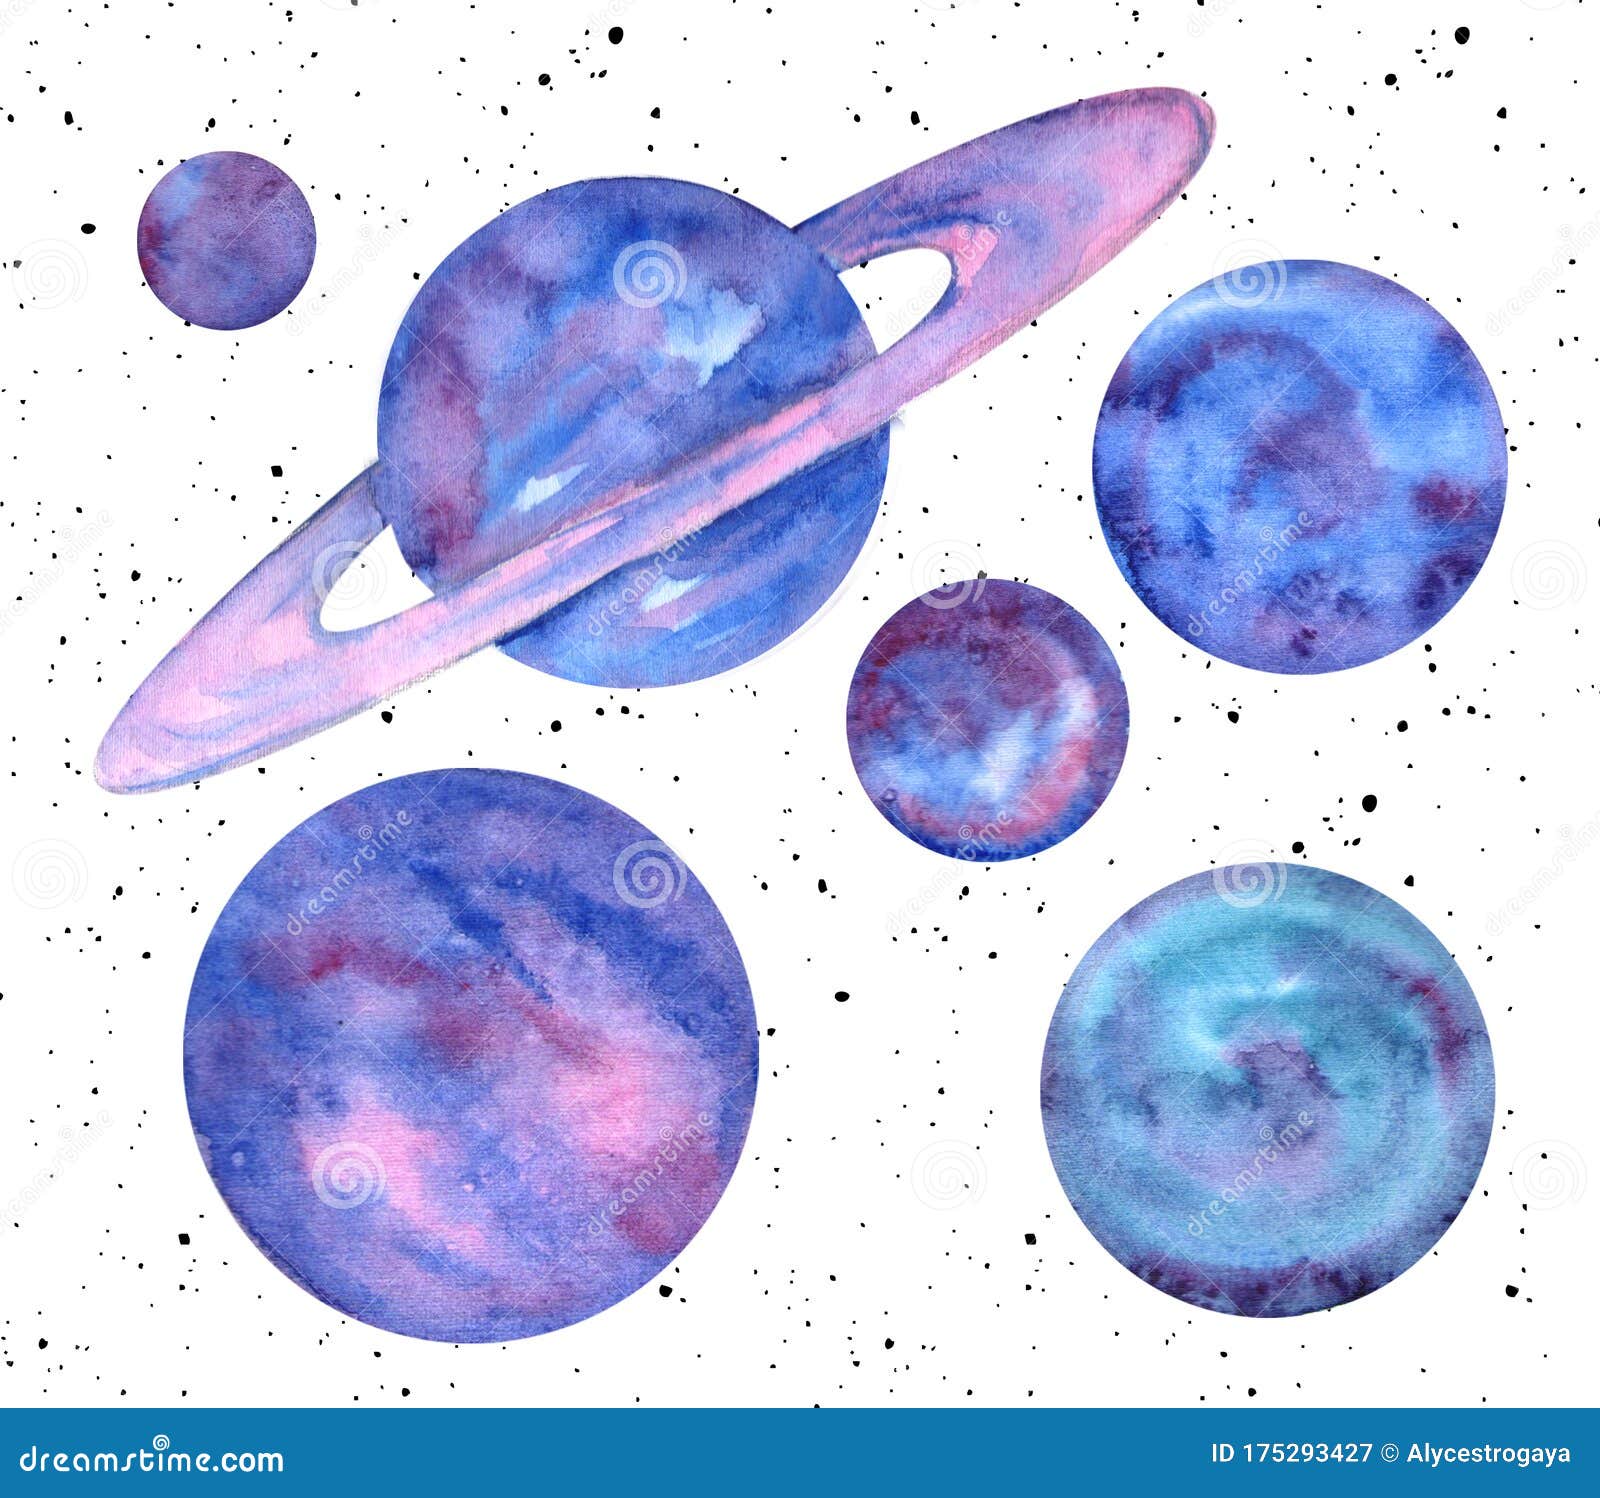 Handdrawn Watercolor Set of Planets Isolated on White Background